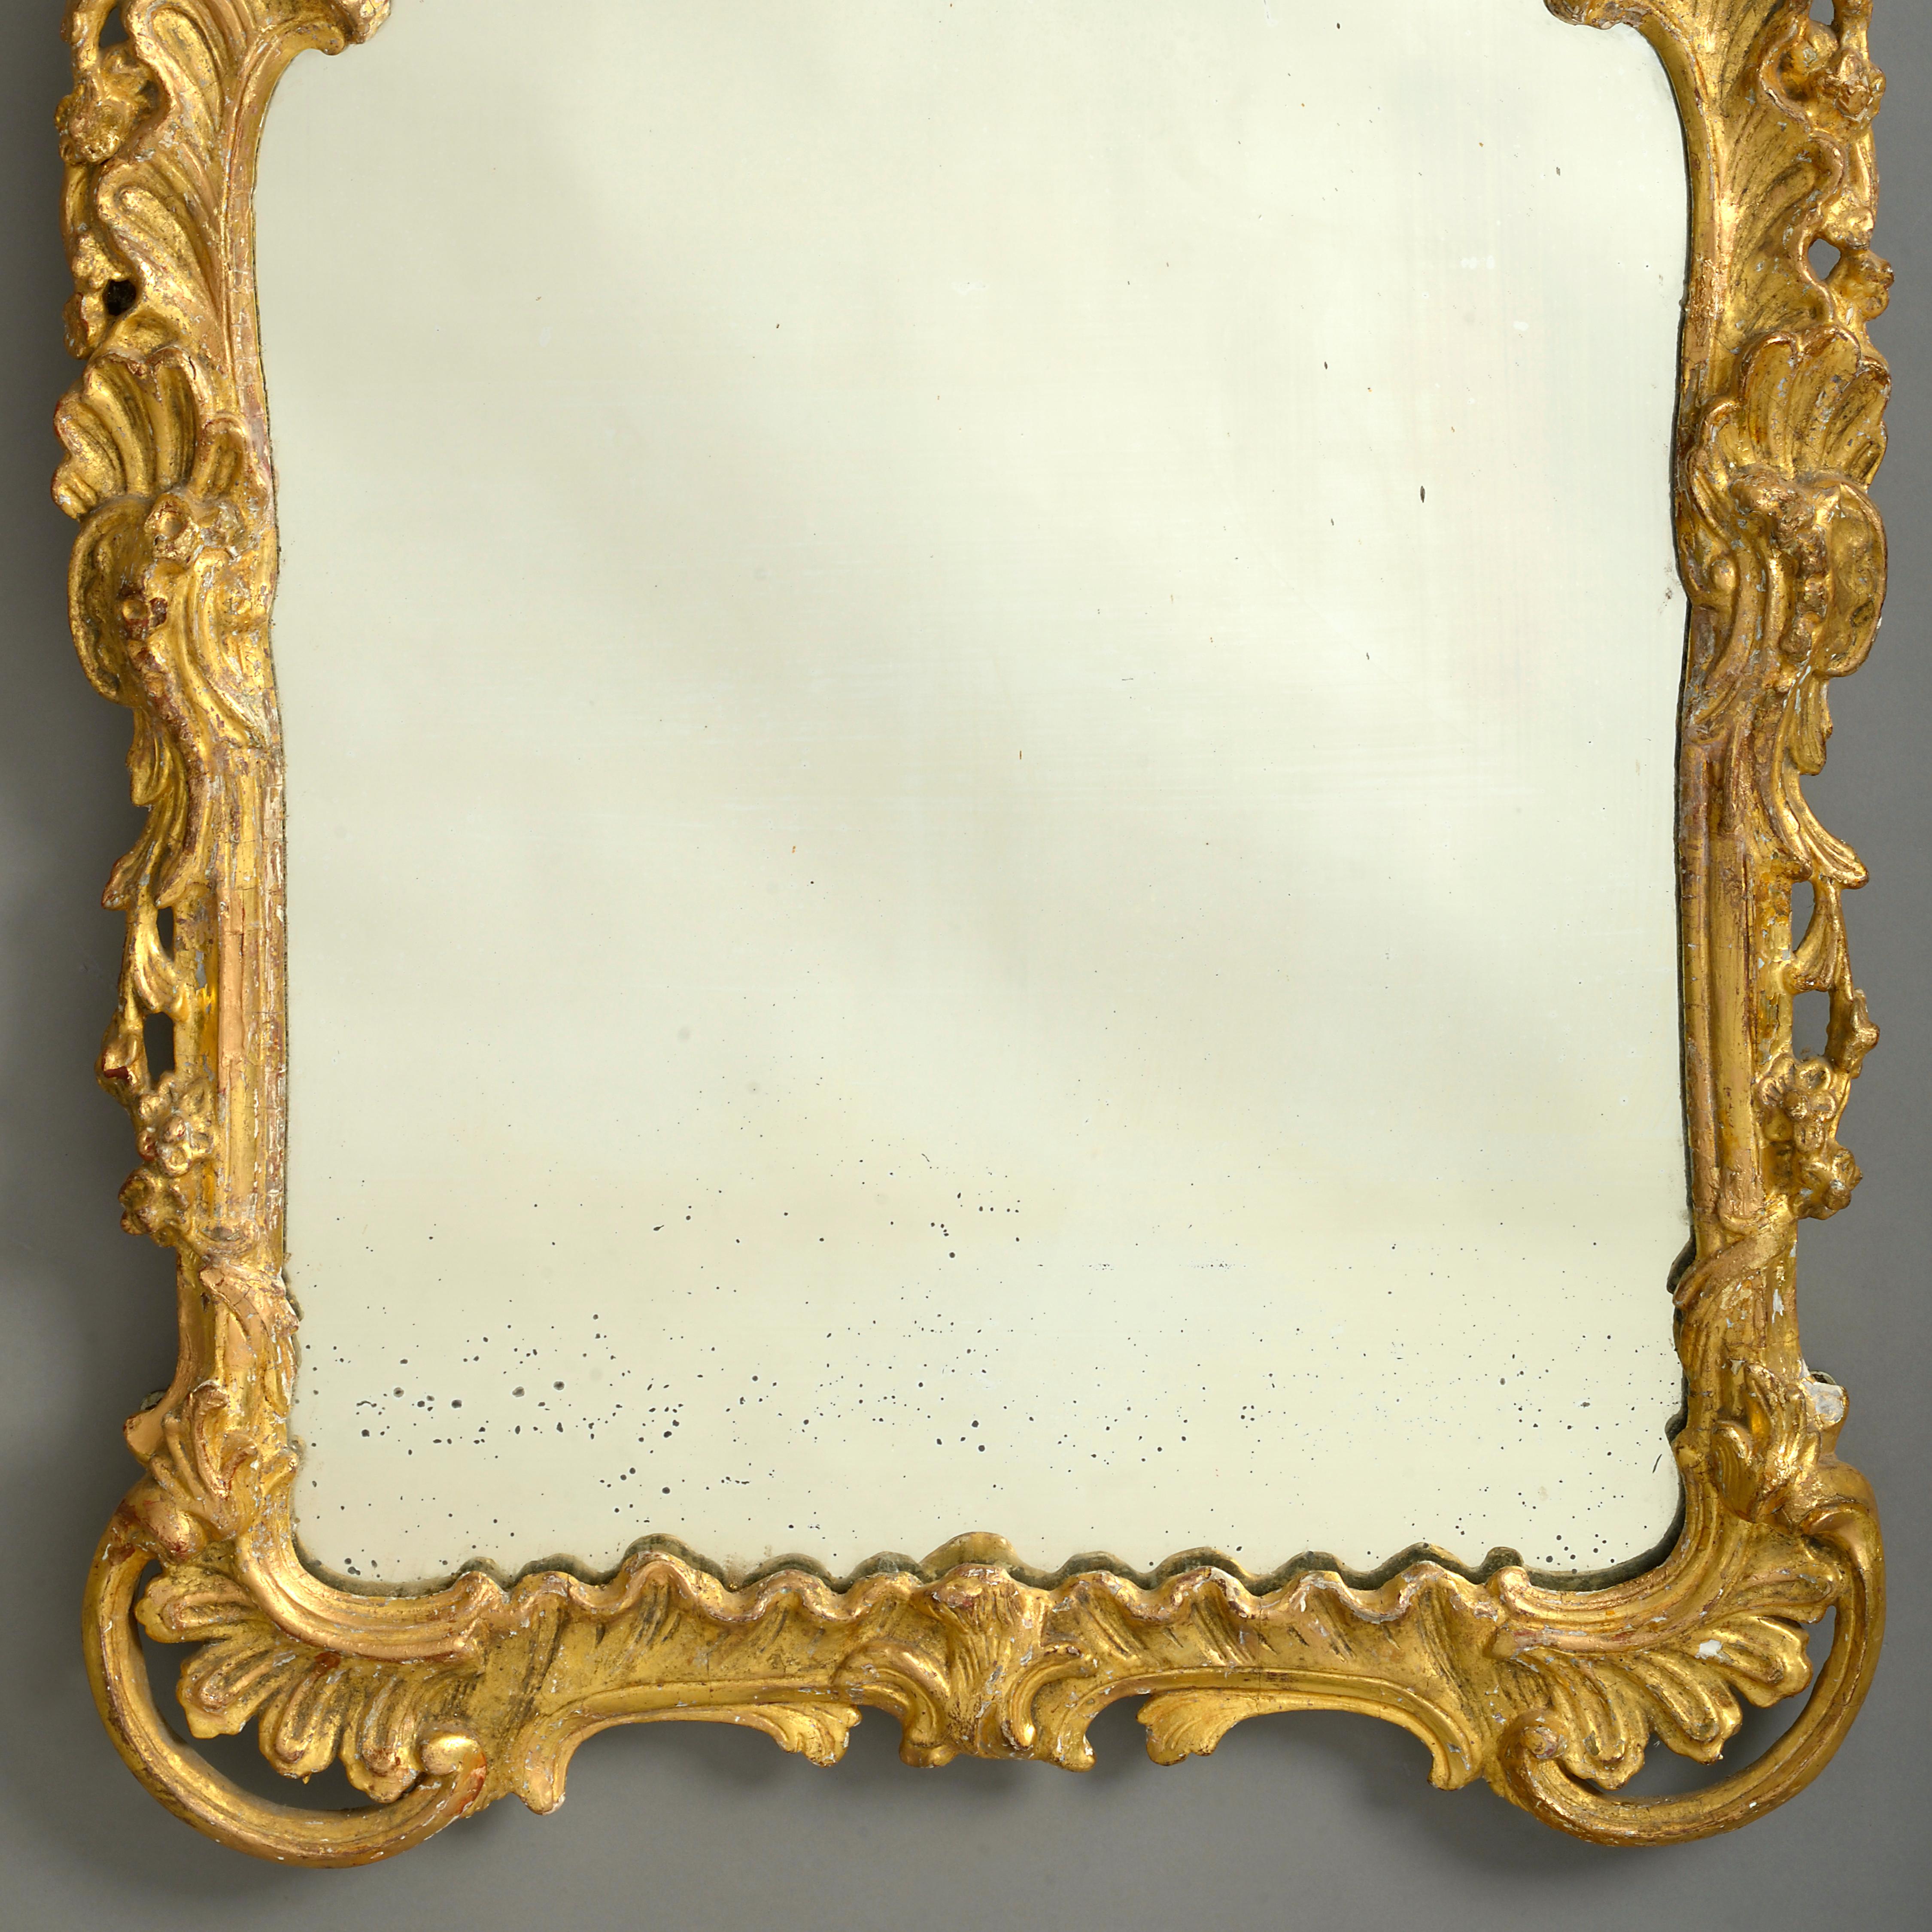 A mid-18th century Louis XV period giltwood mirror in the Rococo taste, the carved giltwood frame with floral, rocaille and foliate decoration throughout.